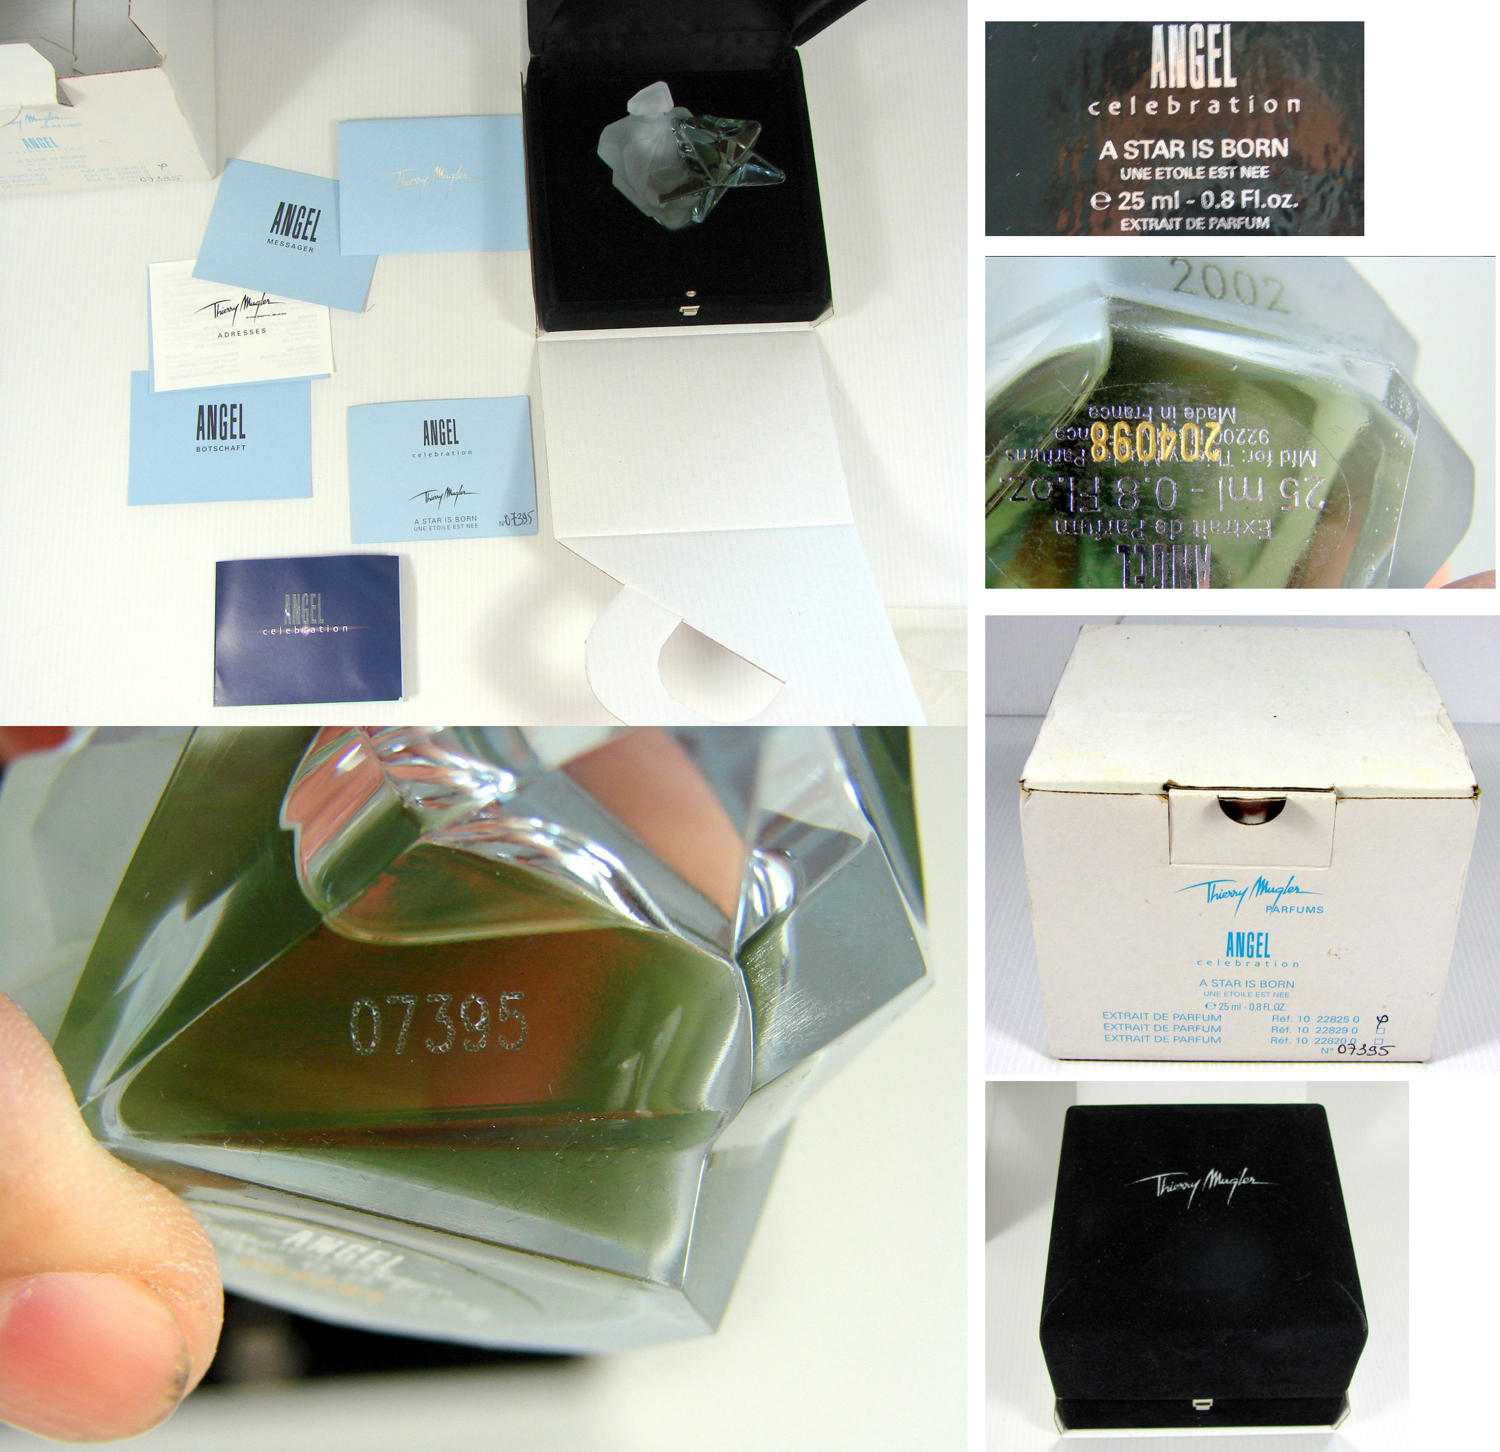 Thierry Mugler Angel Perfume Collector's Limited Edition Bottle 2002 A Star is Born Une Etoile Est Nee Details Box